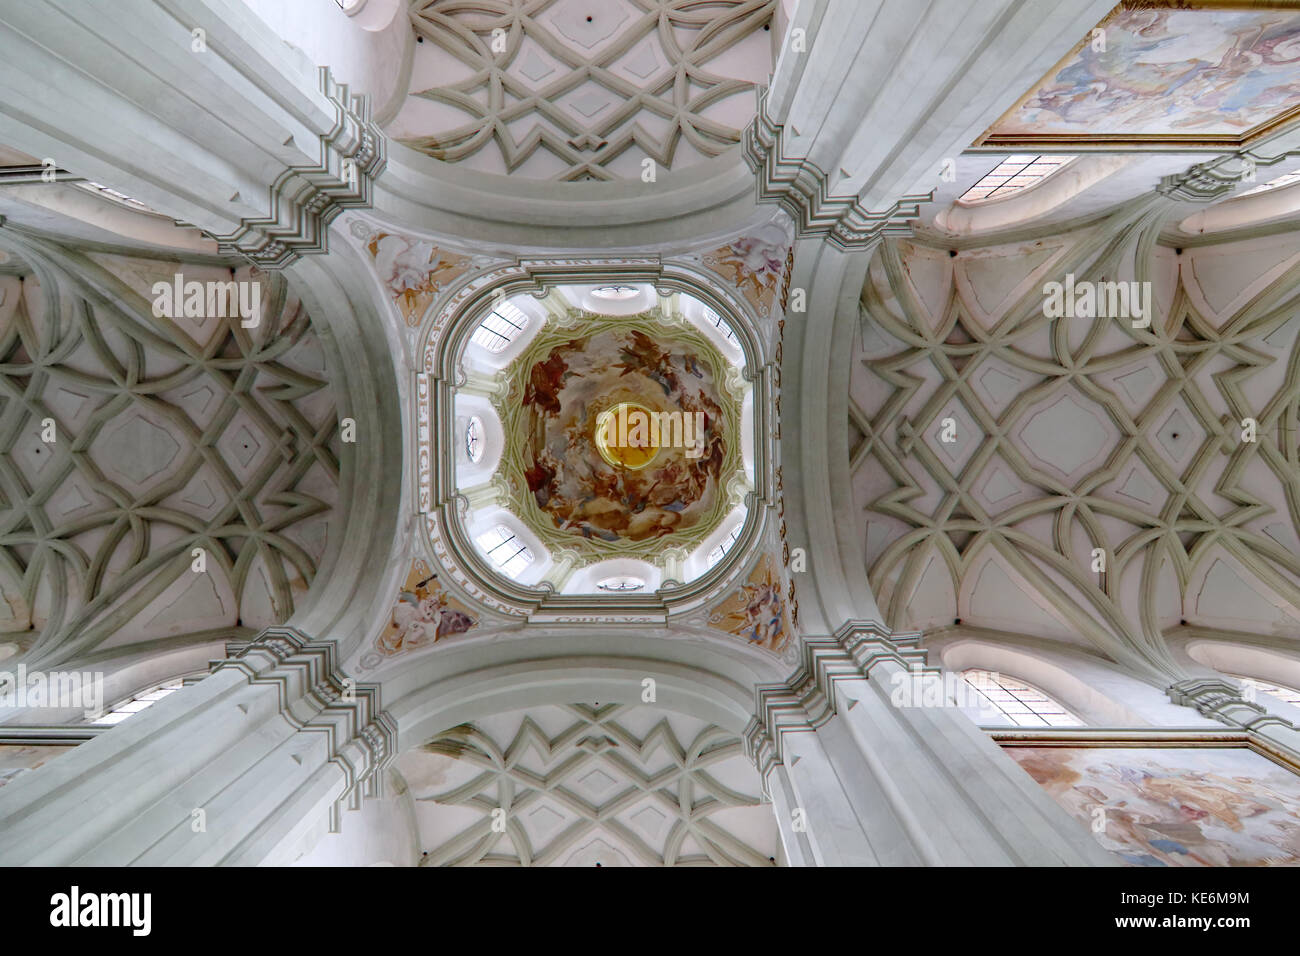 Gothic vault of the ceiling - view from below Stock Photo